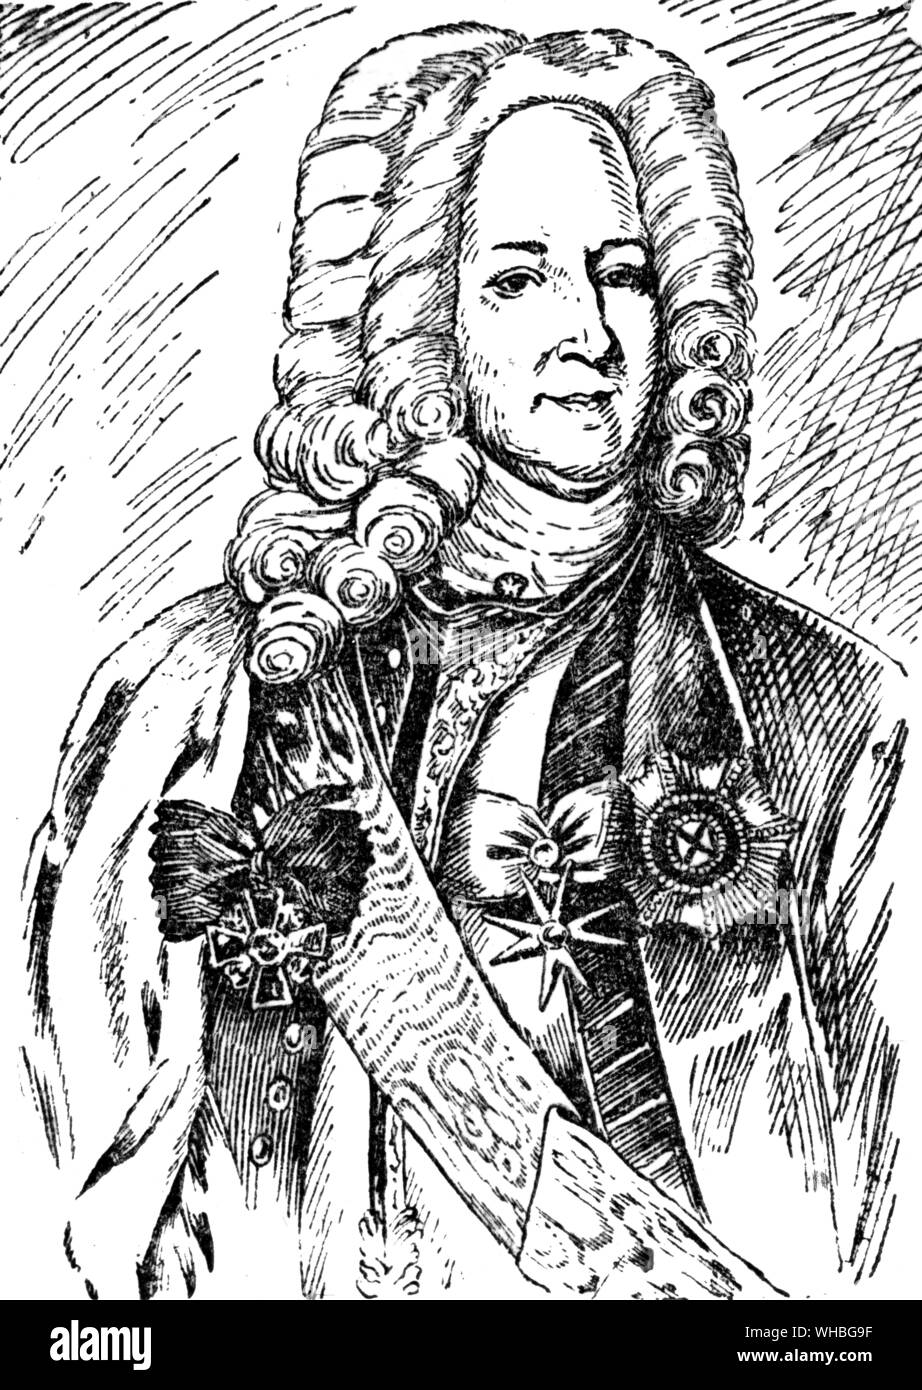 Alexander Menshikov - engraving - he distinguished himself as a brave and talented commander during Peter's Swedish campaign. The Tsar called him his liebste Kamerad , and rewarded him generously.. Stock Photo